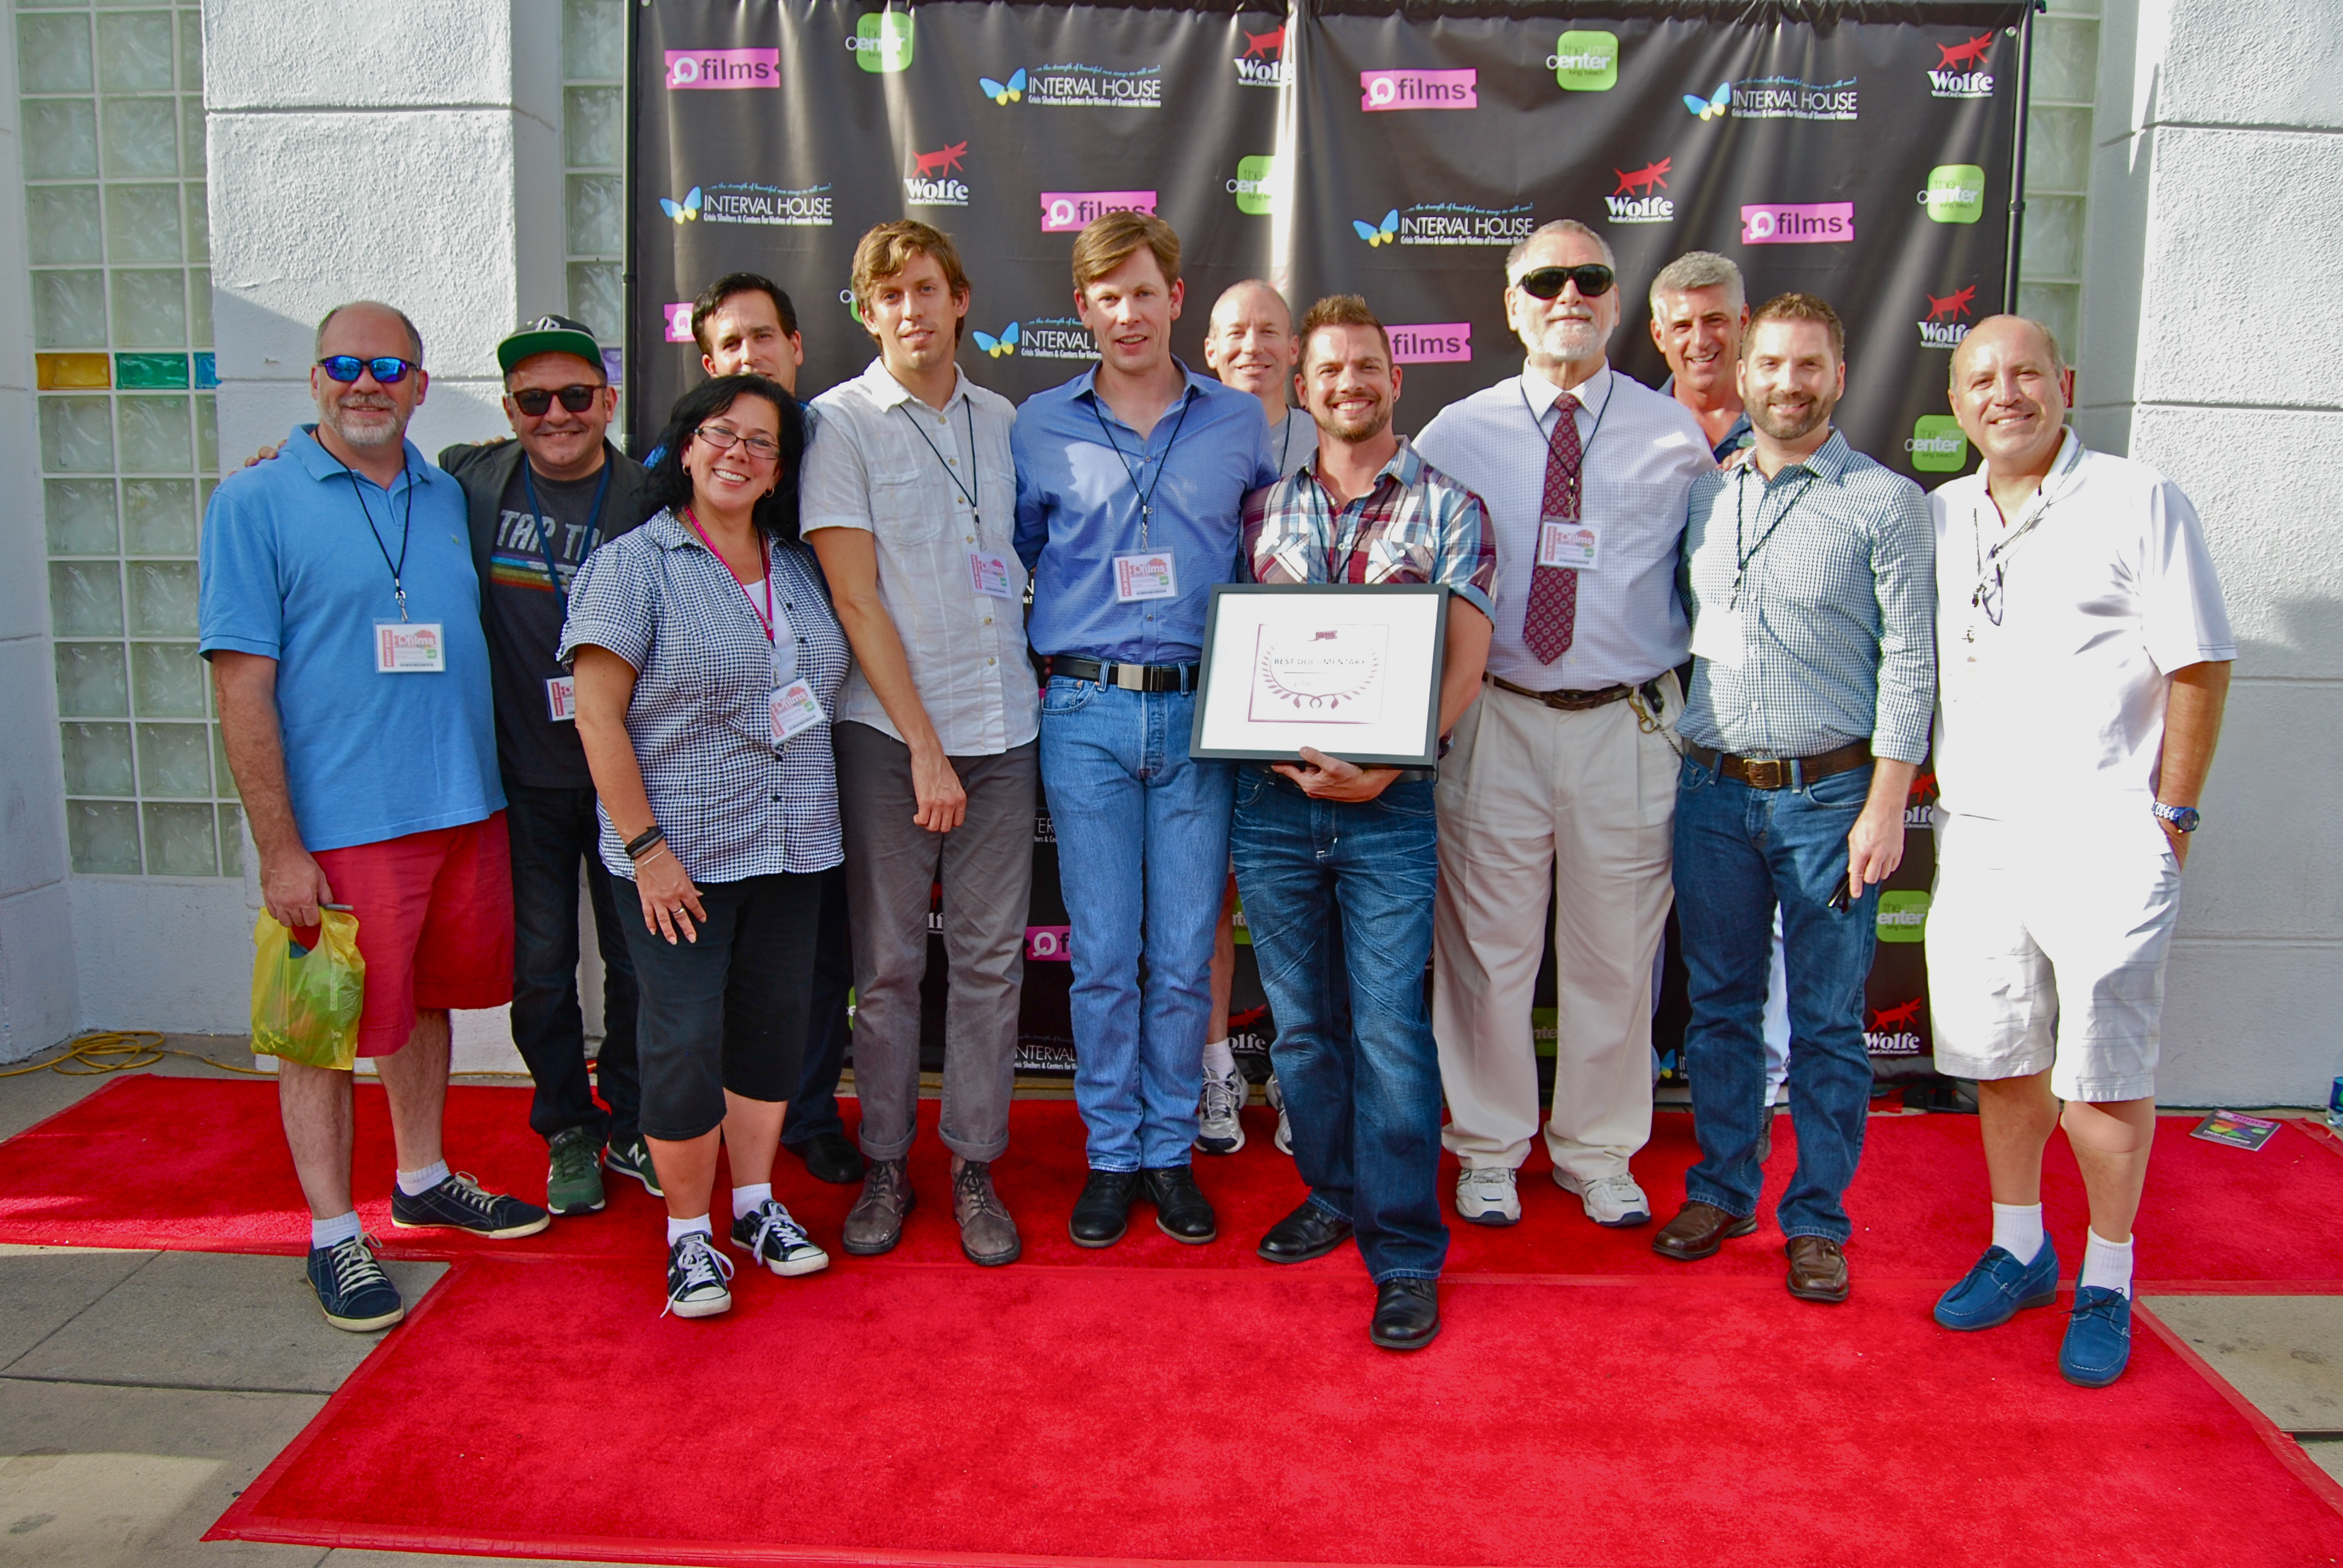 Robert L. Camina's UPSTAIRS INFERNO wins the Jury Award for Best Documentary at the QFilms Long Beach Film Festival (2015)